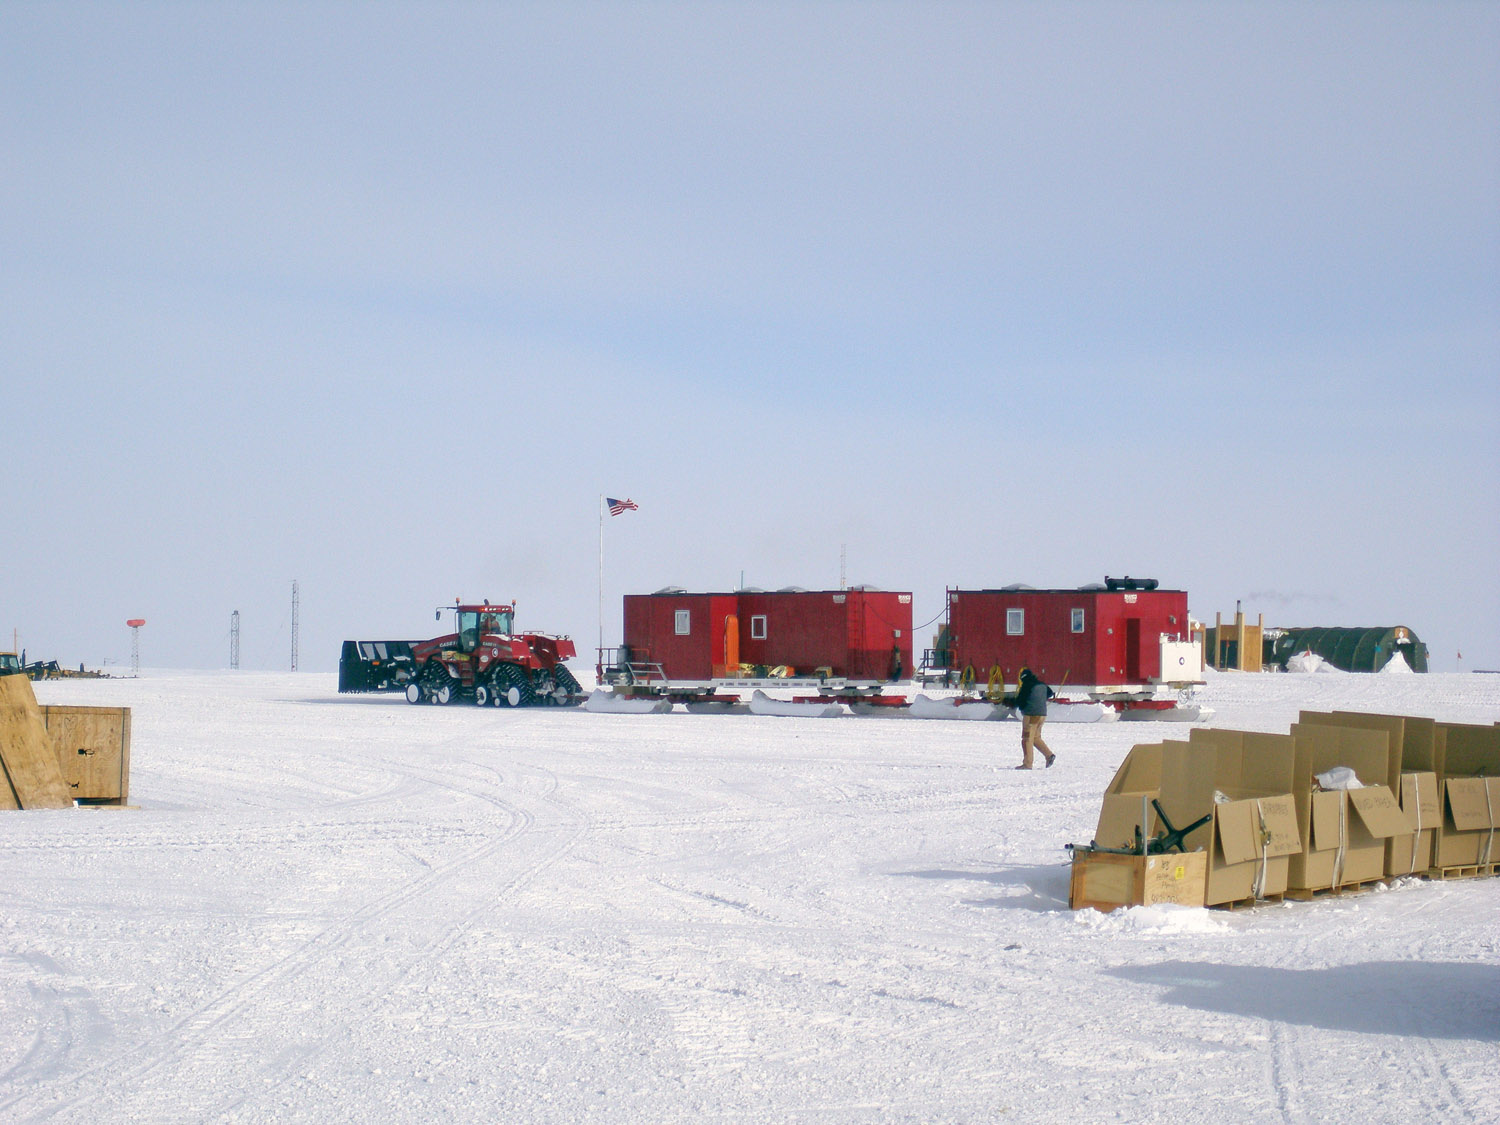 Vehicles and equipment of the South Pole Traverse - 15